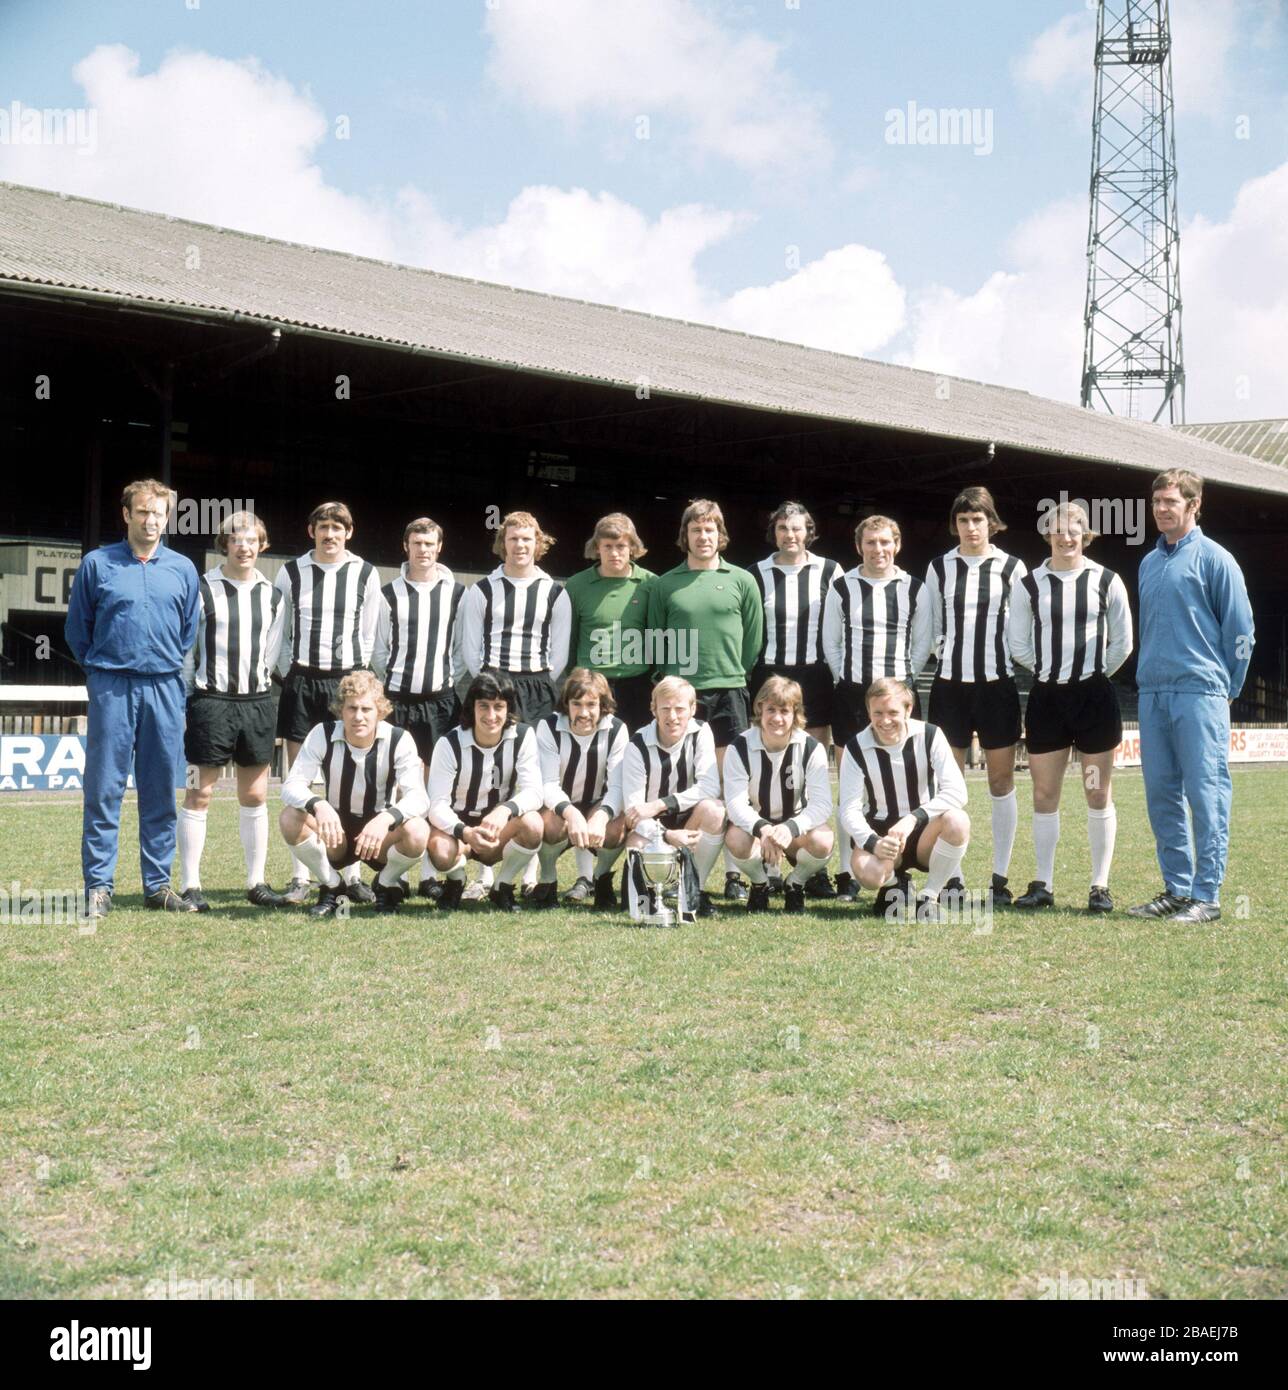 Grimsby Town, Fourth Division Champions 1971-72: (Back Row, l-r) Trainer Jim Clunie, Alan Woodward, Graham Rathbone, Matt Tees, Stewart Gray, Ian Turner, Harry Wainman, Lew Chatterley, Alan Campbell, Mike Czuczman, Clive Wigginton, Manager Lawrie McMenemy; (Front-Row, l-Stuart), Dave Boyden, Dave Worthemann, Dave Lewing Stockfoto